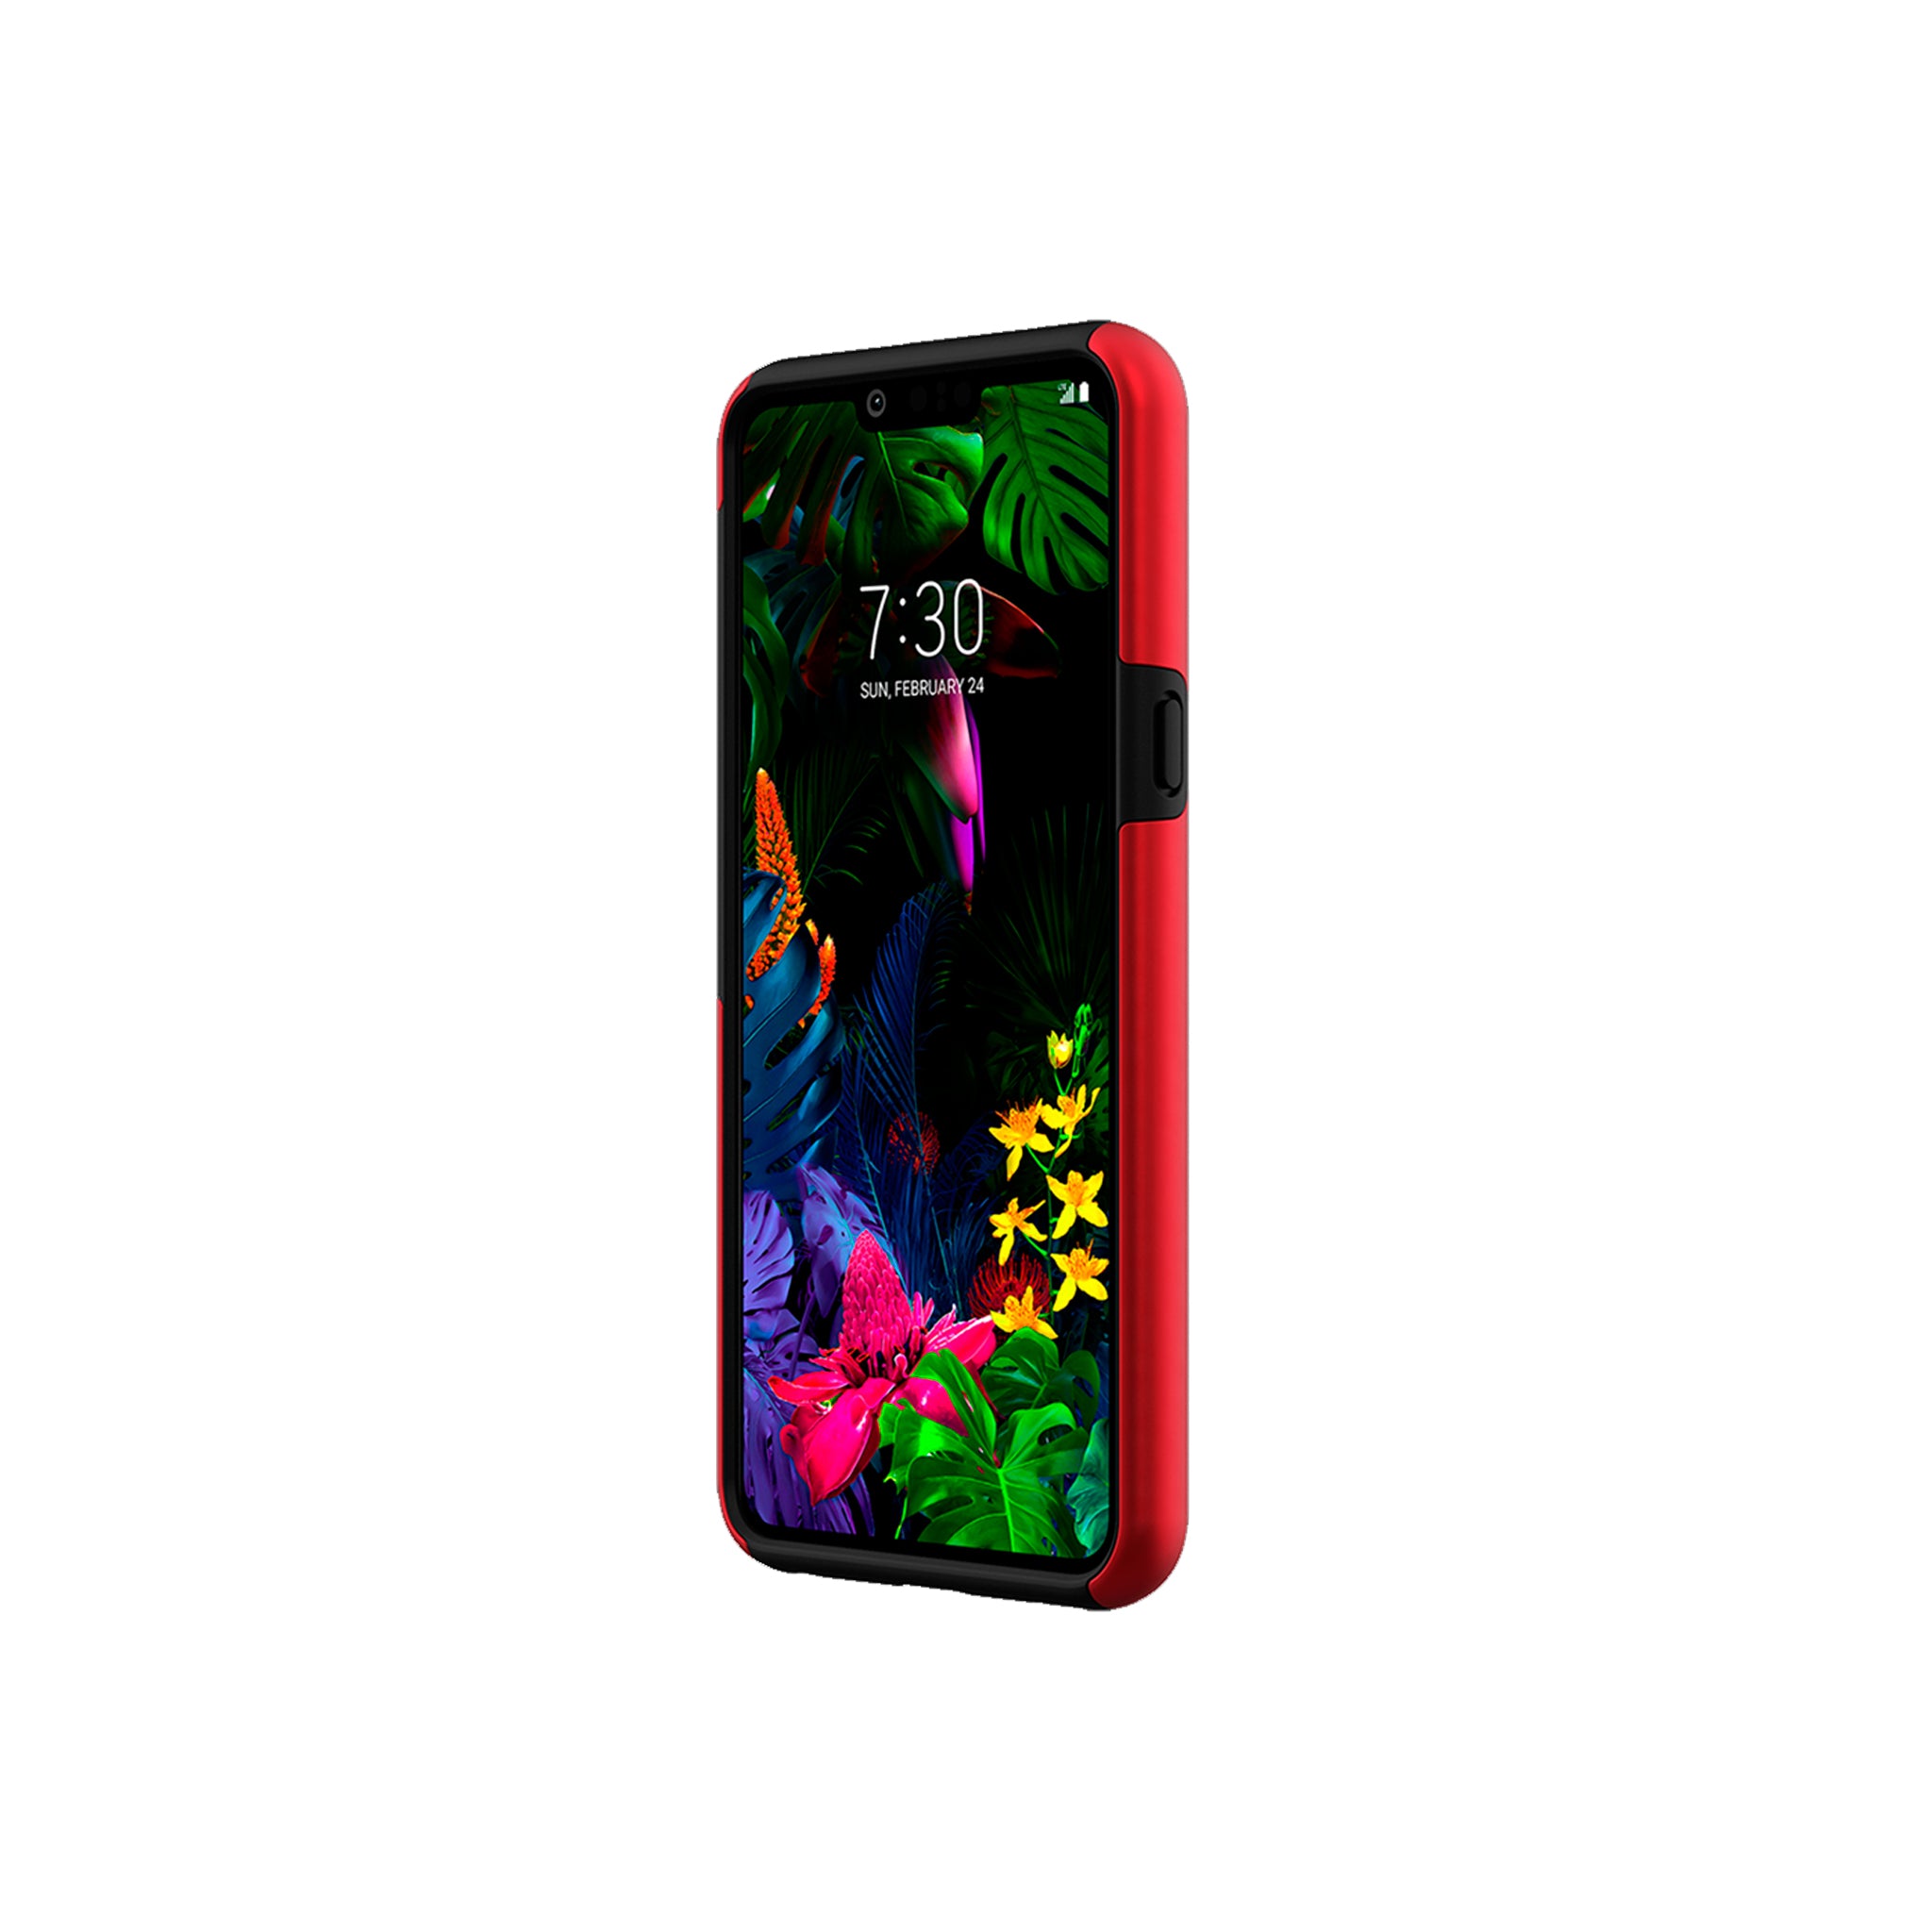 Incipio - DualPro Case For Lg G8 Thinq - Iridescent Red And Black